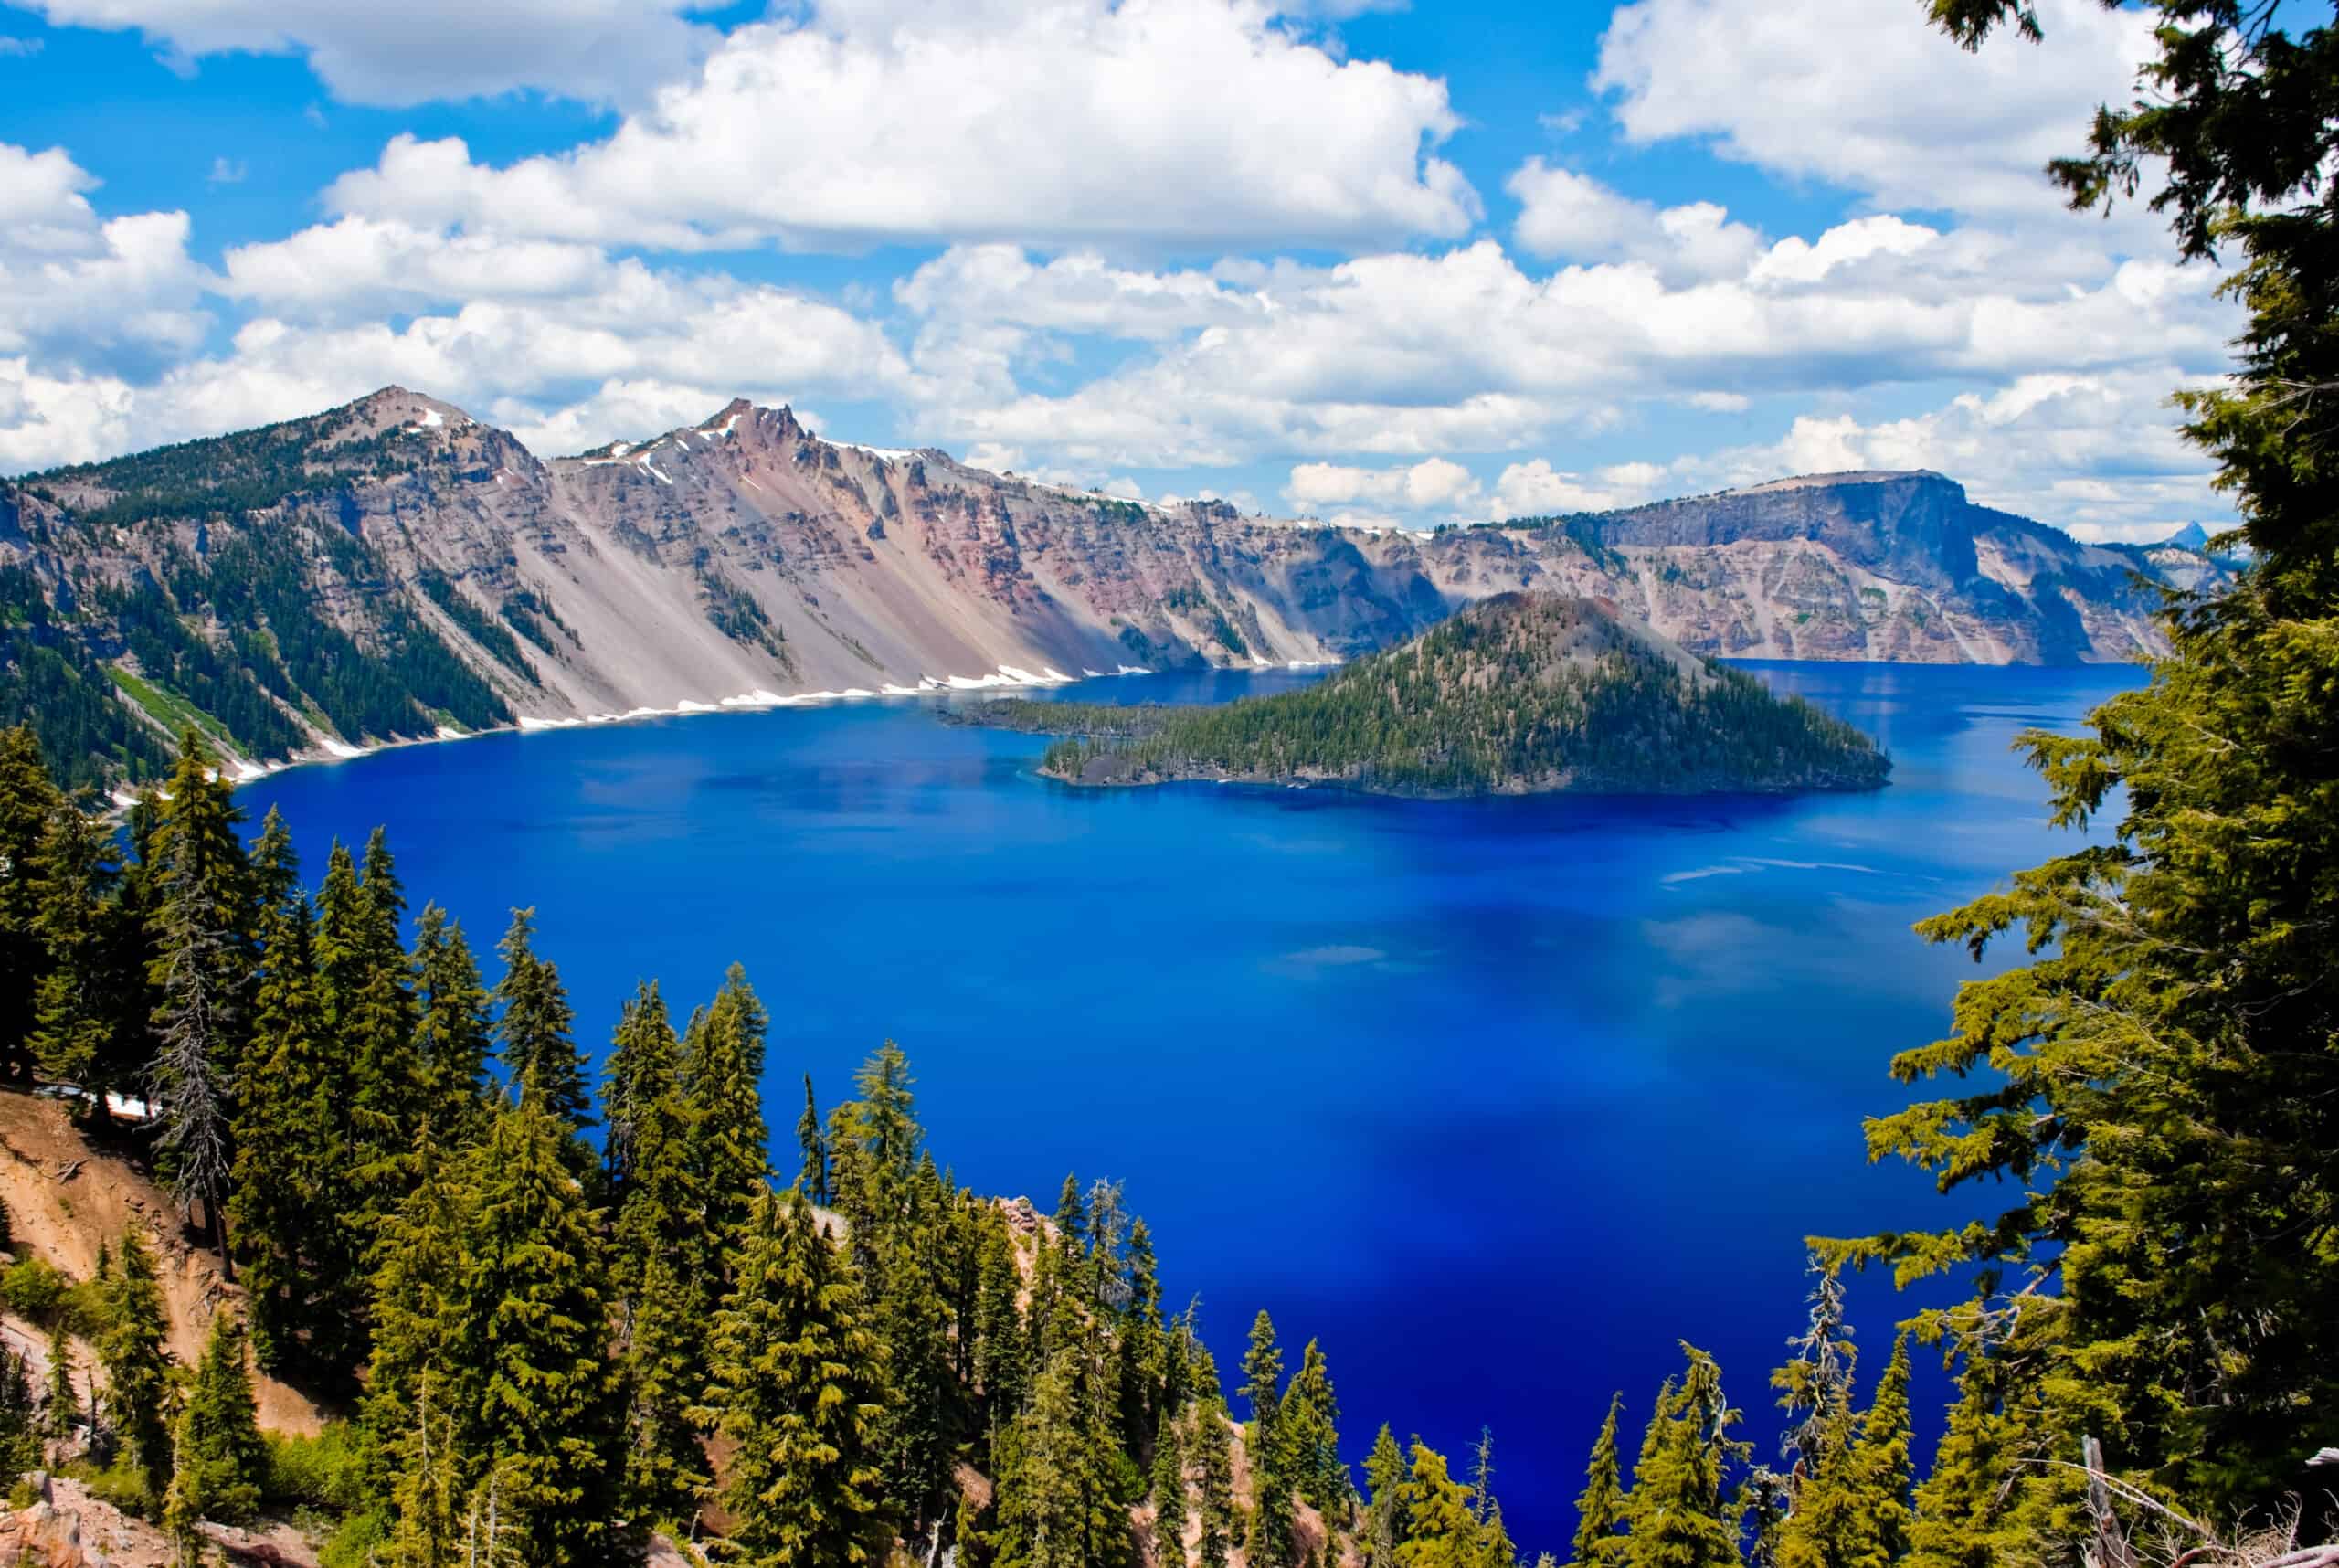 <p>Crater Lake is located in southeastern Oregon, and it is a volcanic crater lake created by the eruption of Mount Mazama 7,700 years ago. The first thing you will notice about Crater Lake is the deep blue color of the water. Crater Lake is one of the things Oregon is known for because it is the deepest lake in the United States and in the top ten of the deepest lakes in the entire world. Visitors come to the lake to enjoy the surrounding recreation area, where you can hike, mountain bike, and fish between June and September. There is lodging at the lake and boat excursions to go out and look at the two island formations in the middle of the lake. Swimmers may be disappointed because the lake is extremely cold, and swimming is only permitted in two areas.</p>